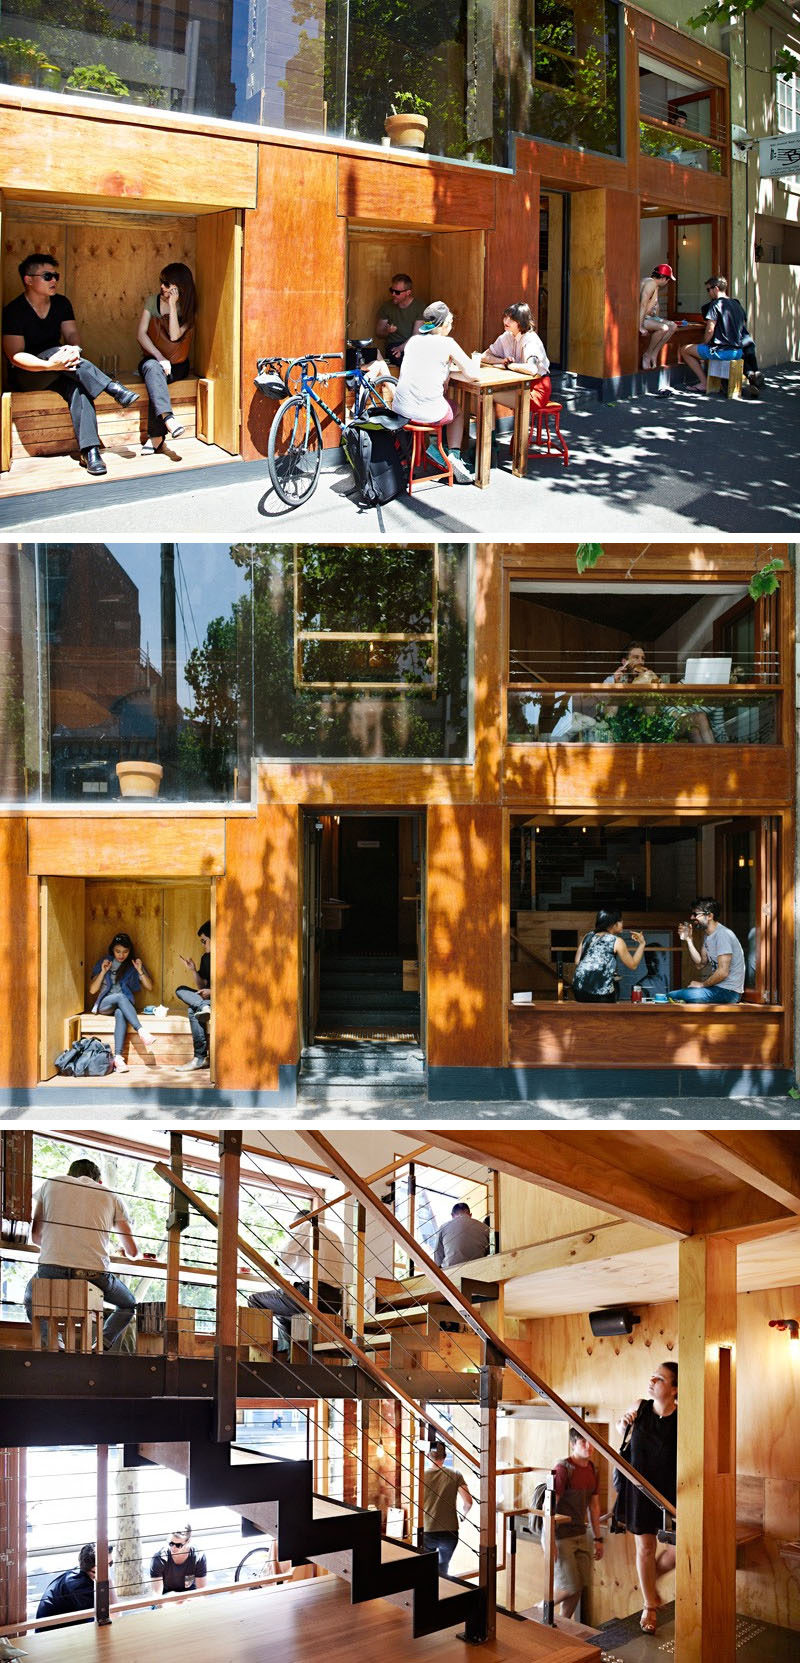 This modern cafe has built-in wooden seating nooks on the outside of the cafe, while inside, people sit at bars looking out onto the street.